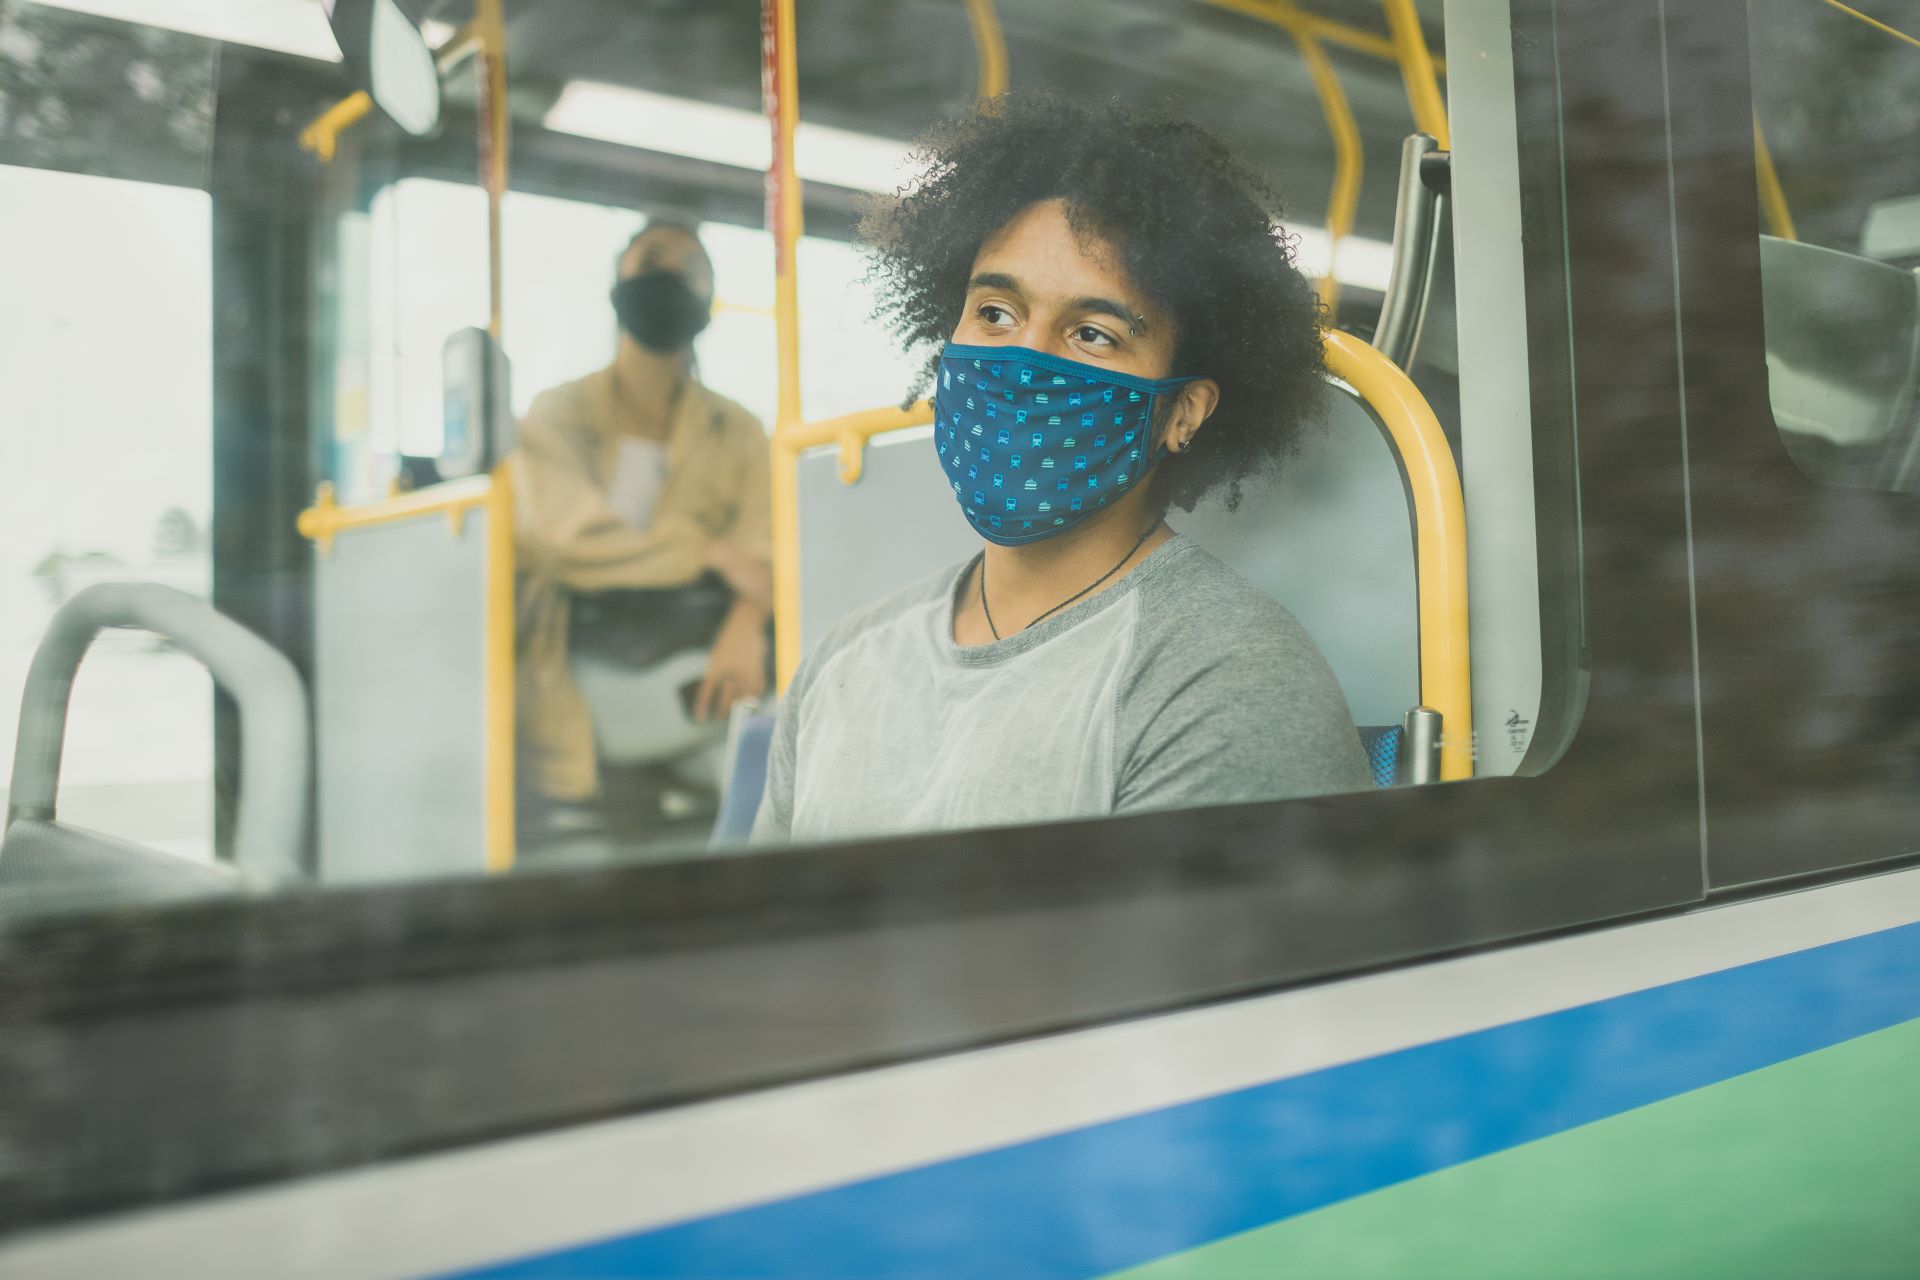 A person with a mask on riding the RapidBus